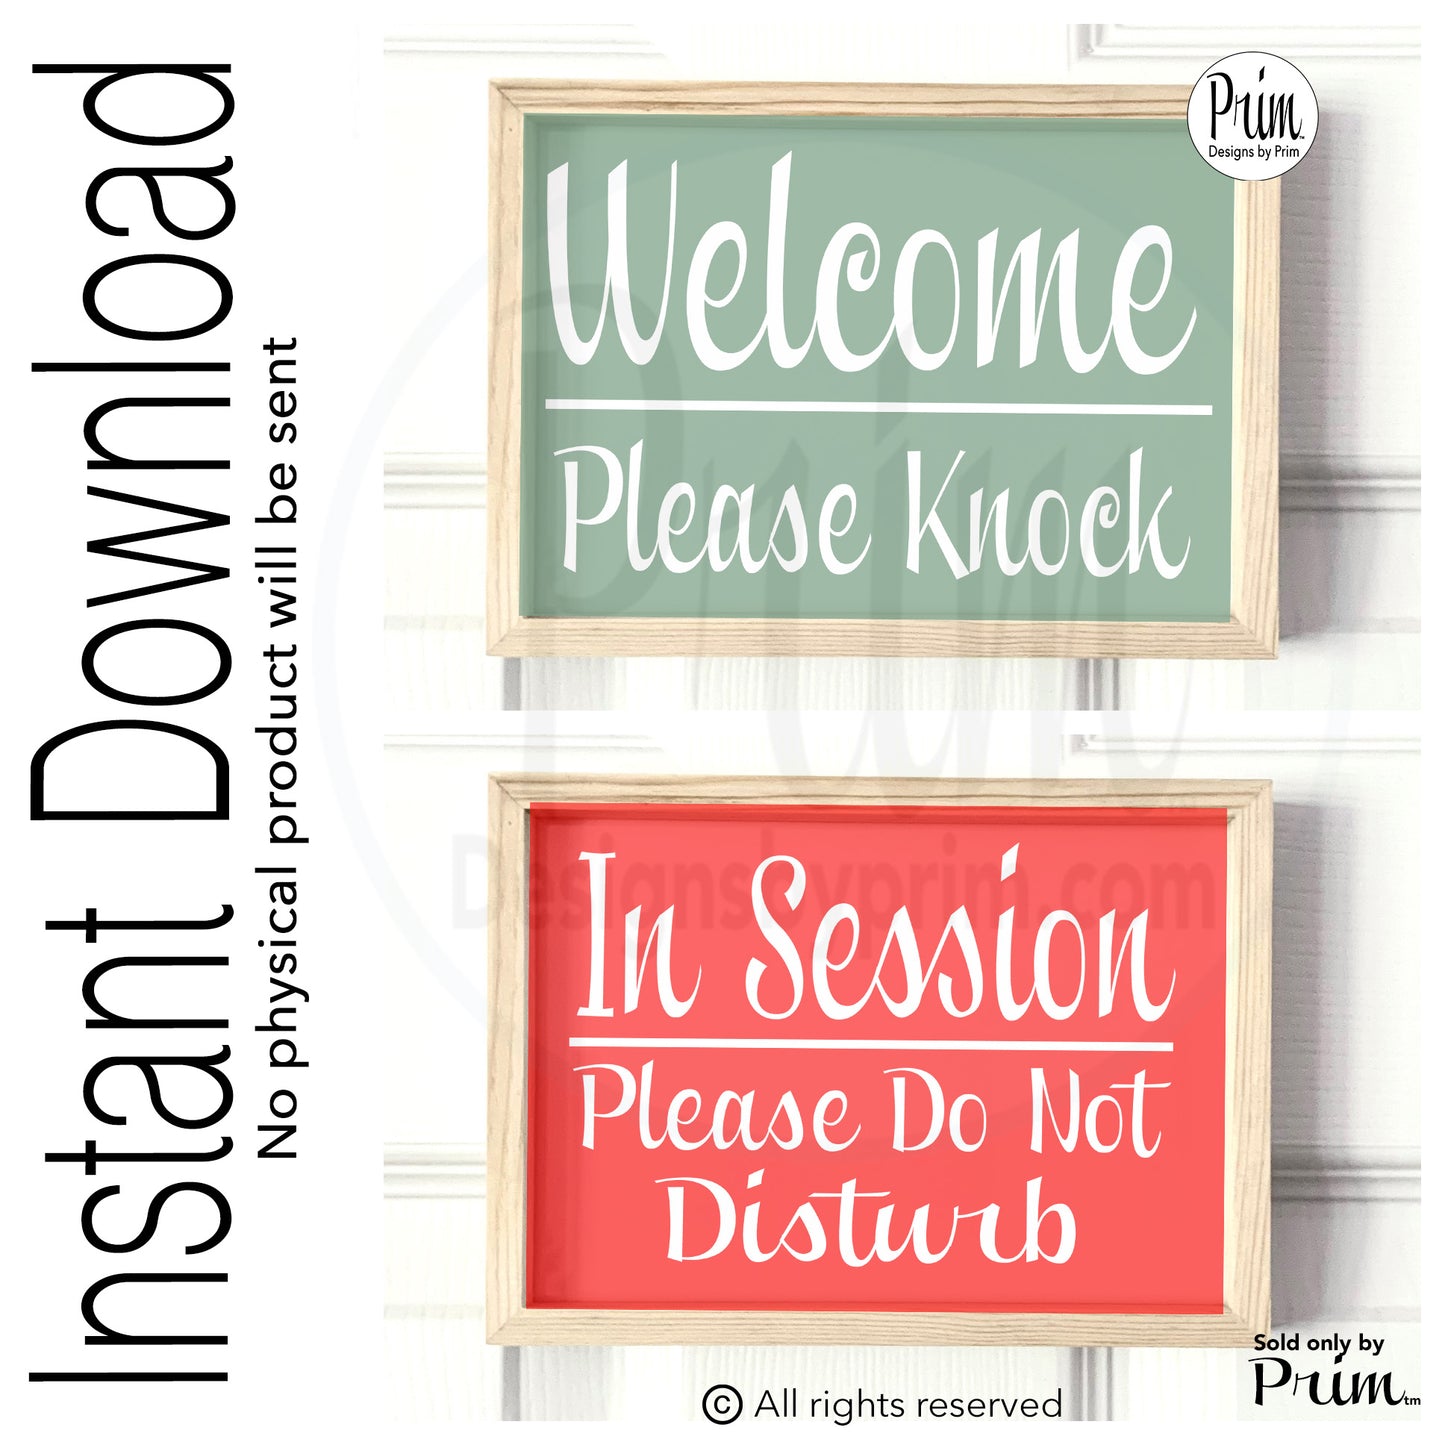 Designs by Prim Welcome Please Knock In a Meeting Please Do Not Disturb Digital Prints Instant Download Unavailable Office Business Counselor Therapist Busy